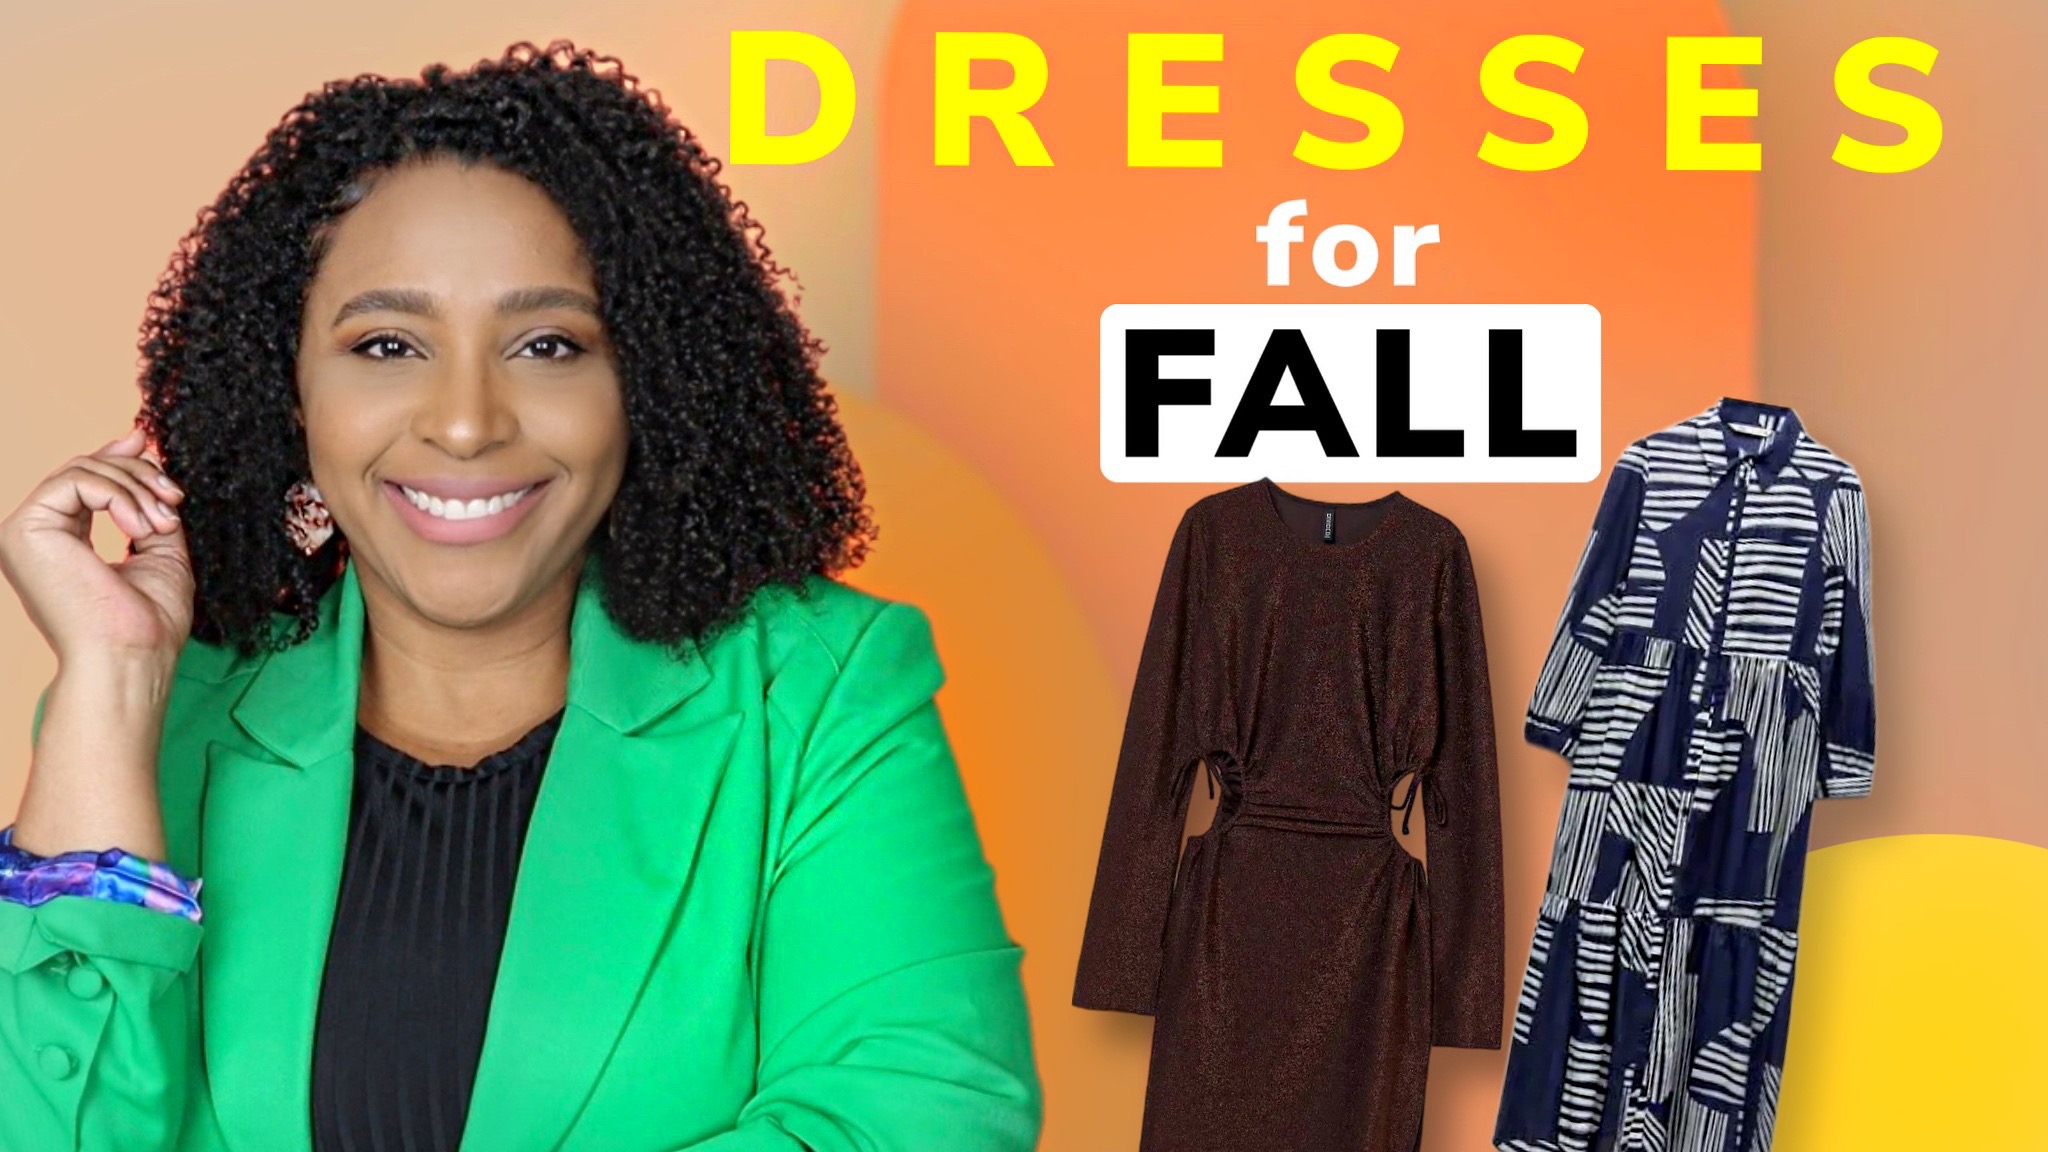 Dress Outfit Ideas for Fall,  Dresses for Women, fall outfits, how to dress, pattys kloset, fall outfit ideas, fall fashion, dresses for women, how to style a dress, how to wear a dress, fall dresses women